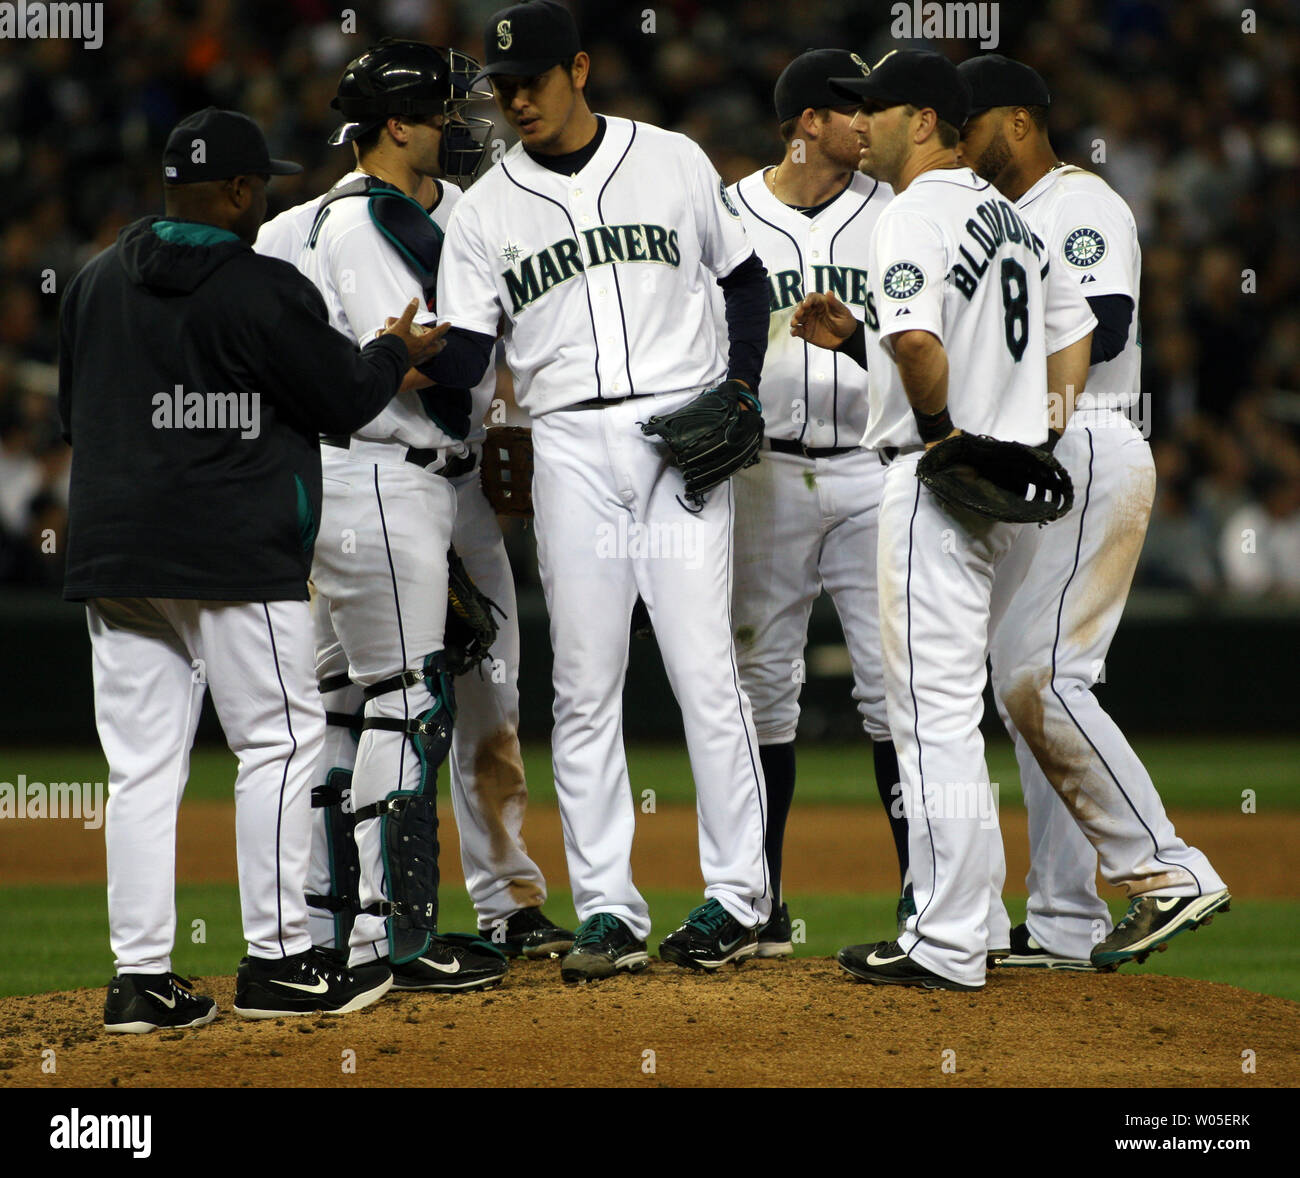 Seattle Mariners' starting pitcher Hisashi Iwakuma is relieved in the eight inning in their game against the New York Yankees on June 10, 2014 at Safeco Field in Seattle.   The Yankees beat the Mariners 3-2.  UPI/Jim Bryant Stock Photo